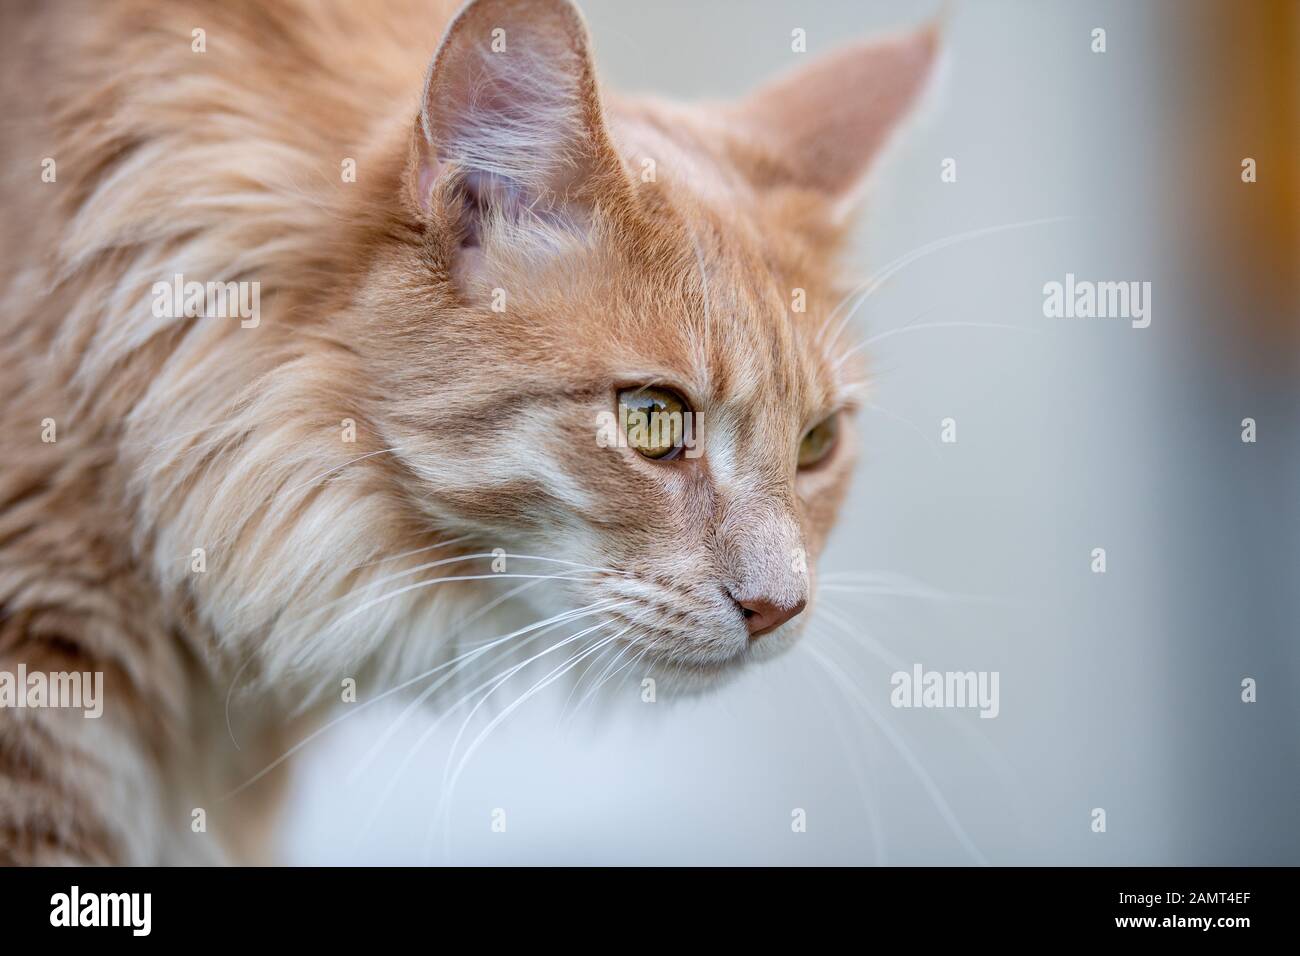 Portrait of a ginger Maine coon cat Stock Photo